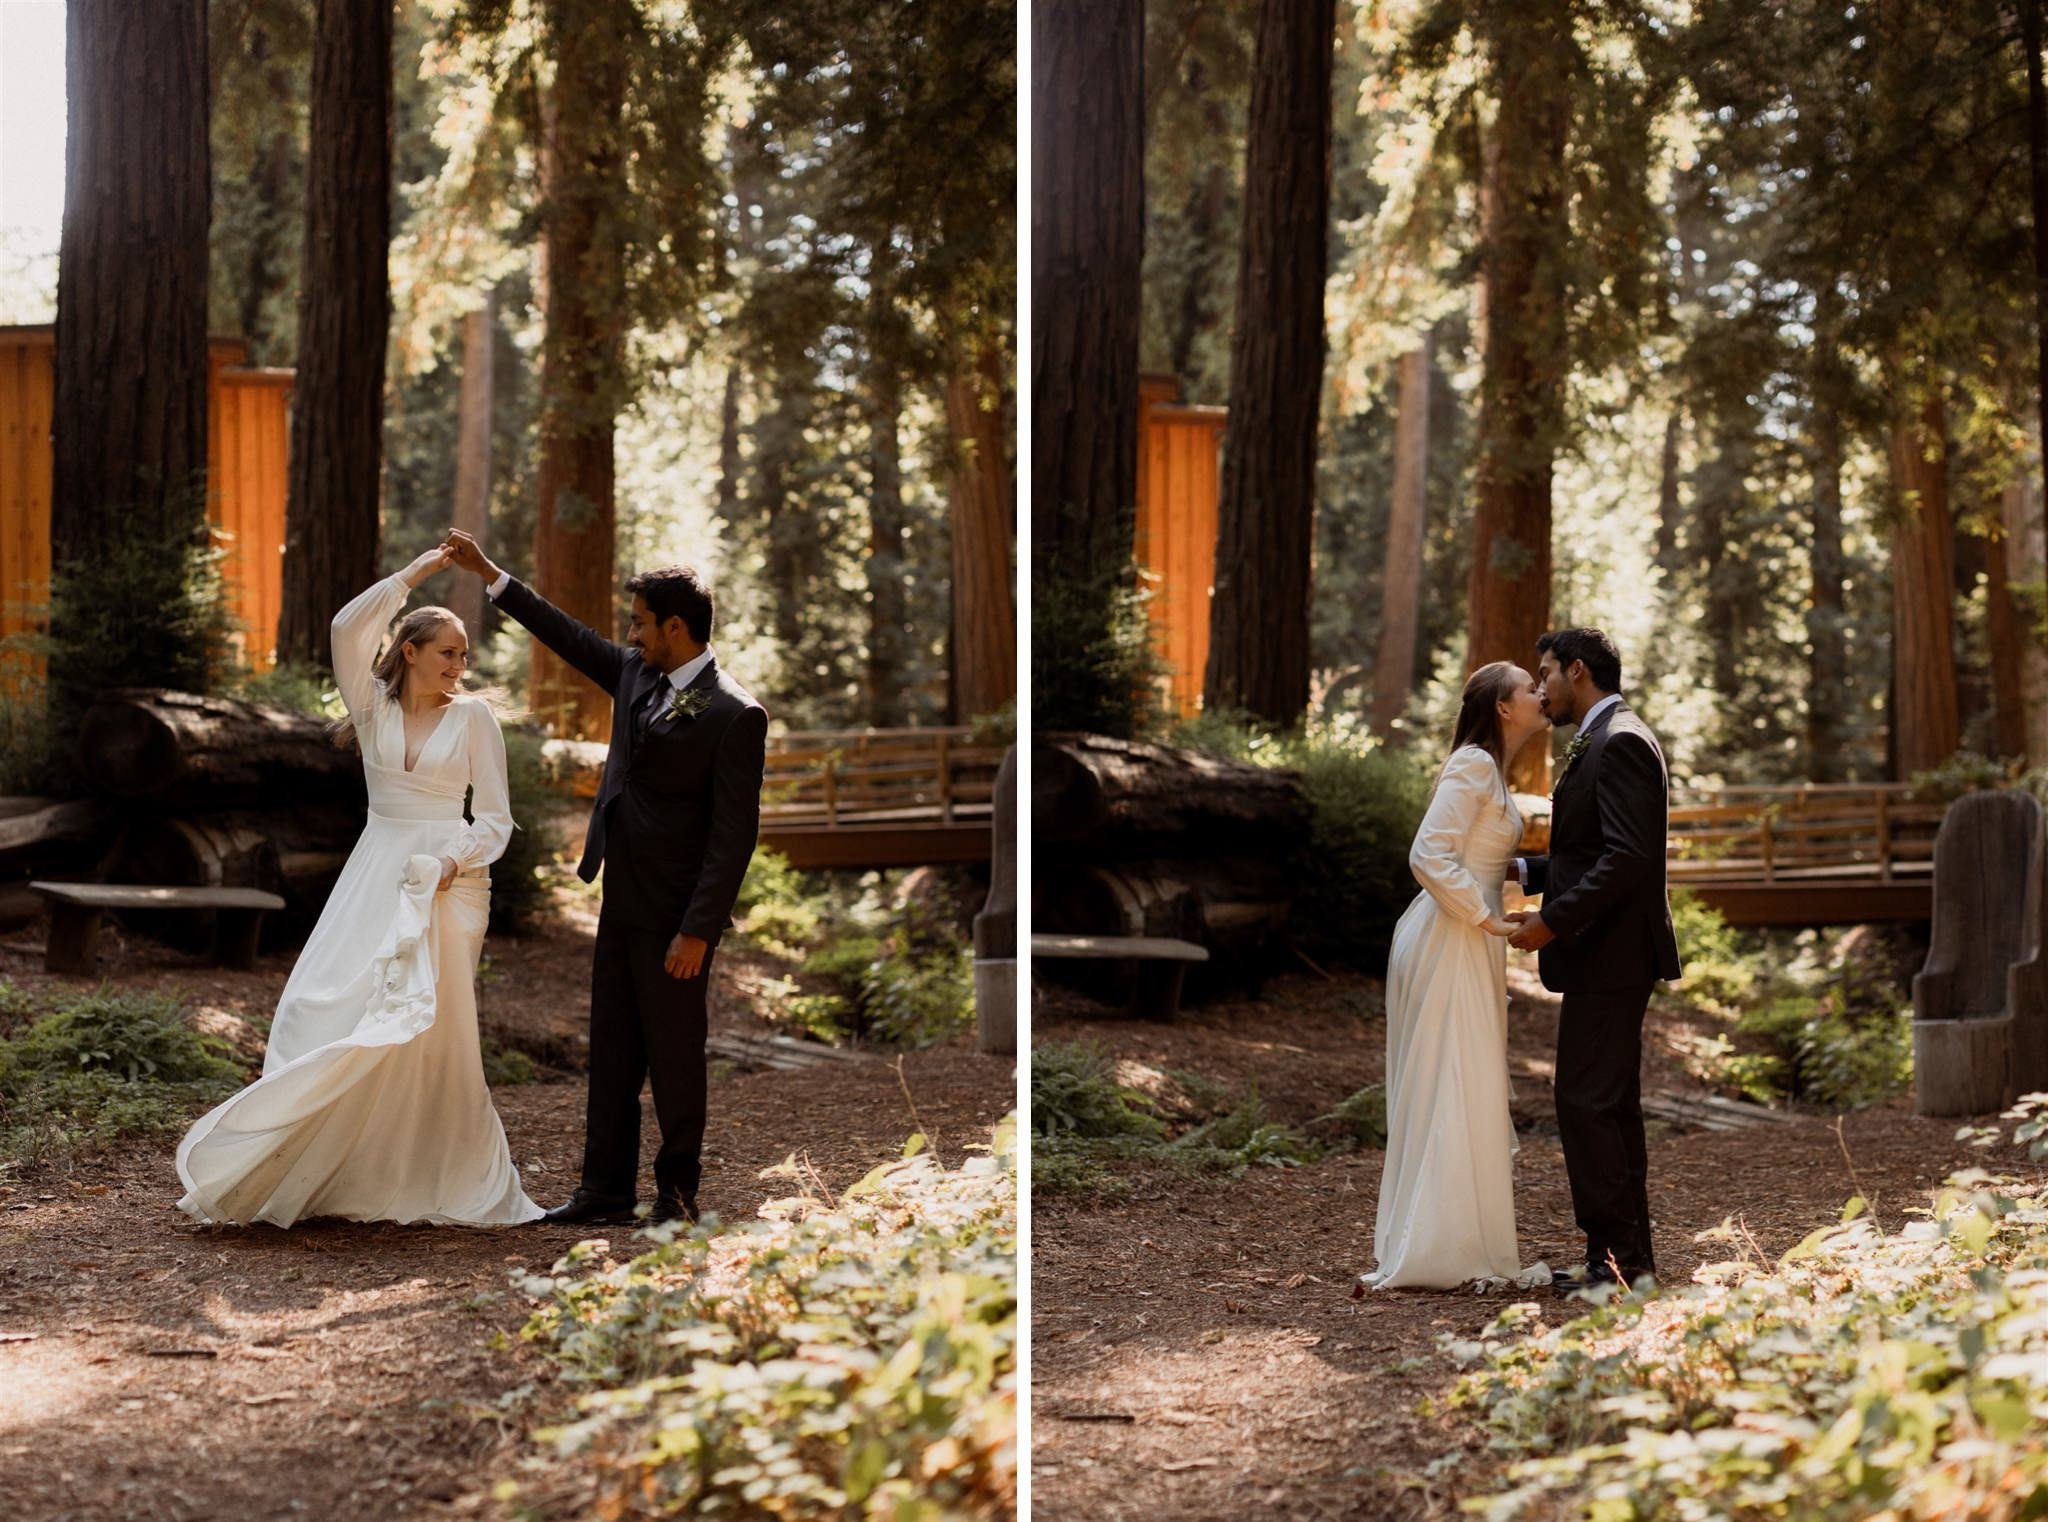 025_Two-Day Big Sur Redwoods Elopement with Family_Will Khoury Elopement Photographer.jpg